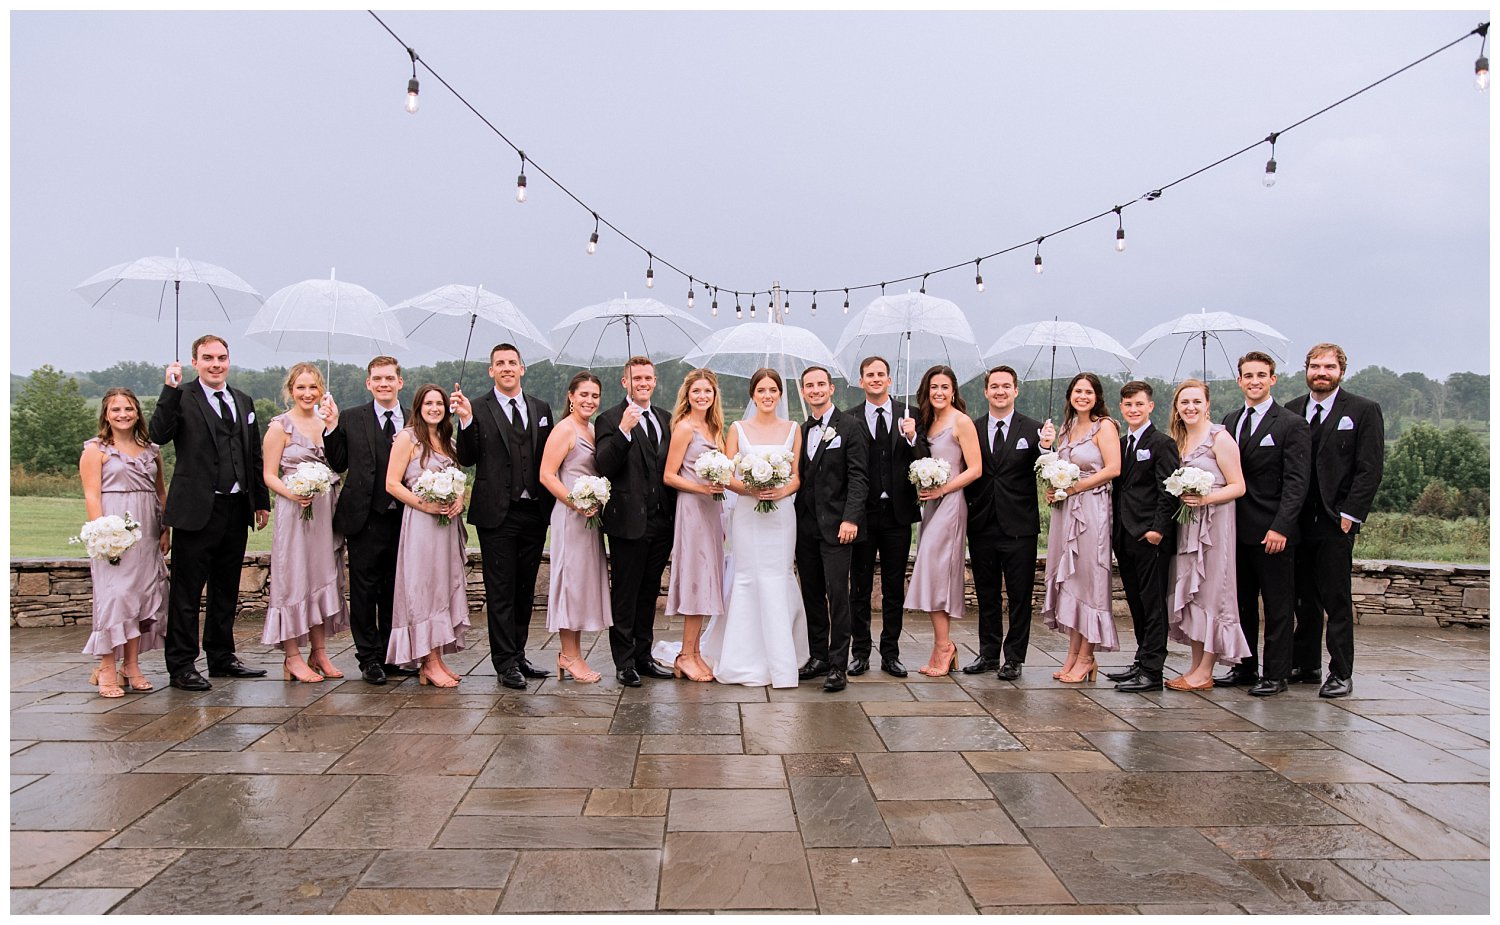 Wedding party portraits at the Market at Grelen